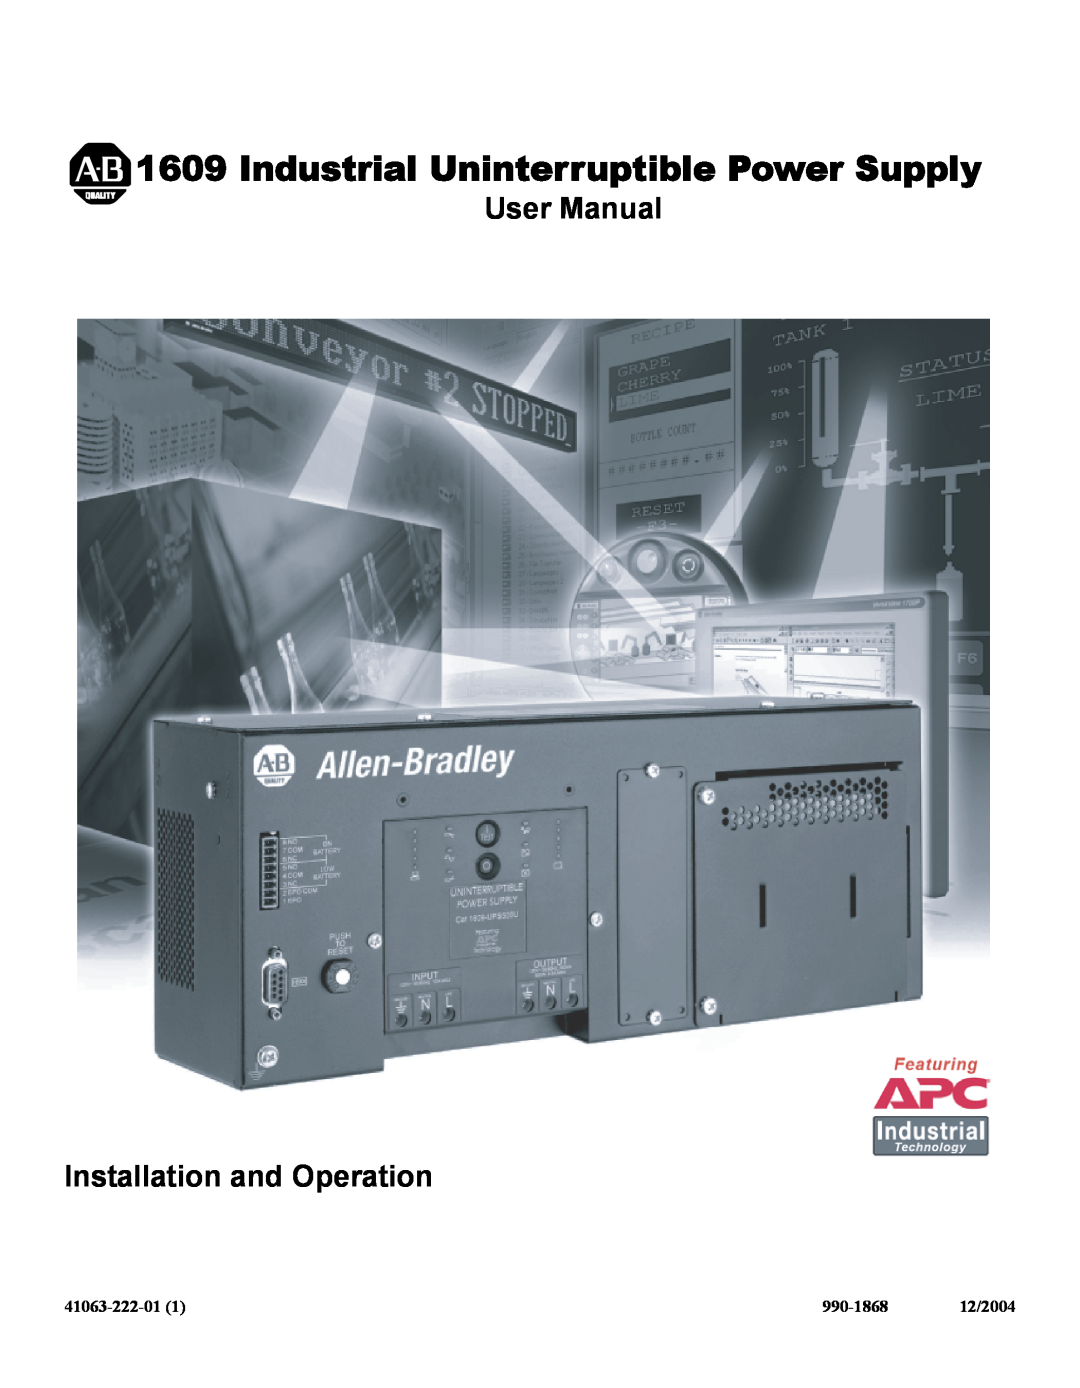 American Power Conversion 1609 user manual Industrial Uninterruptible Power Supply, User Manual Installation and Operation 